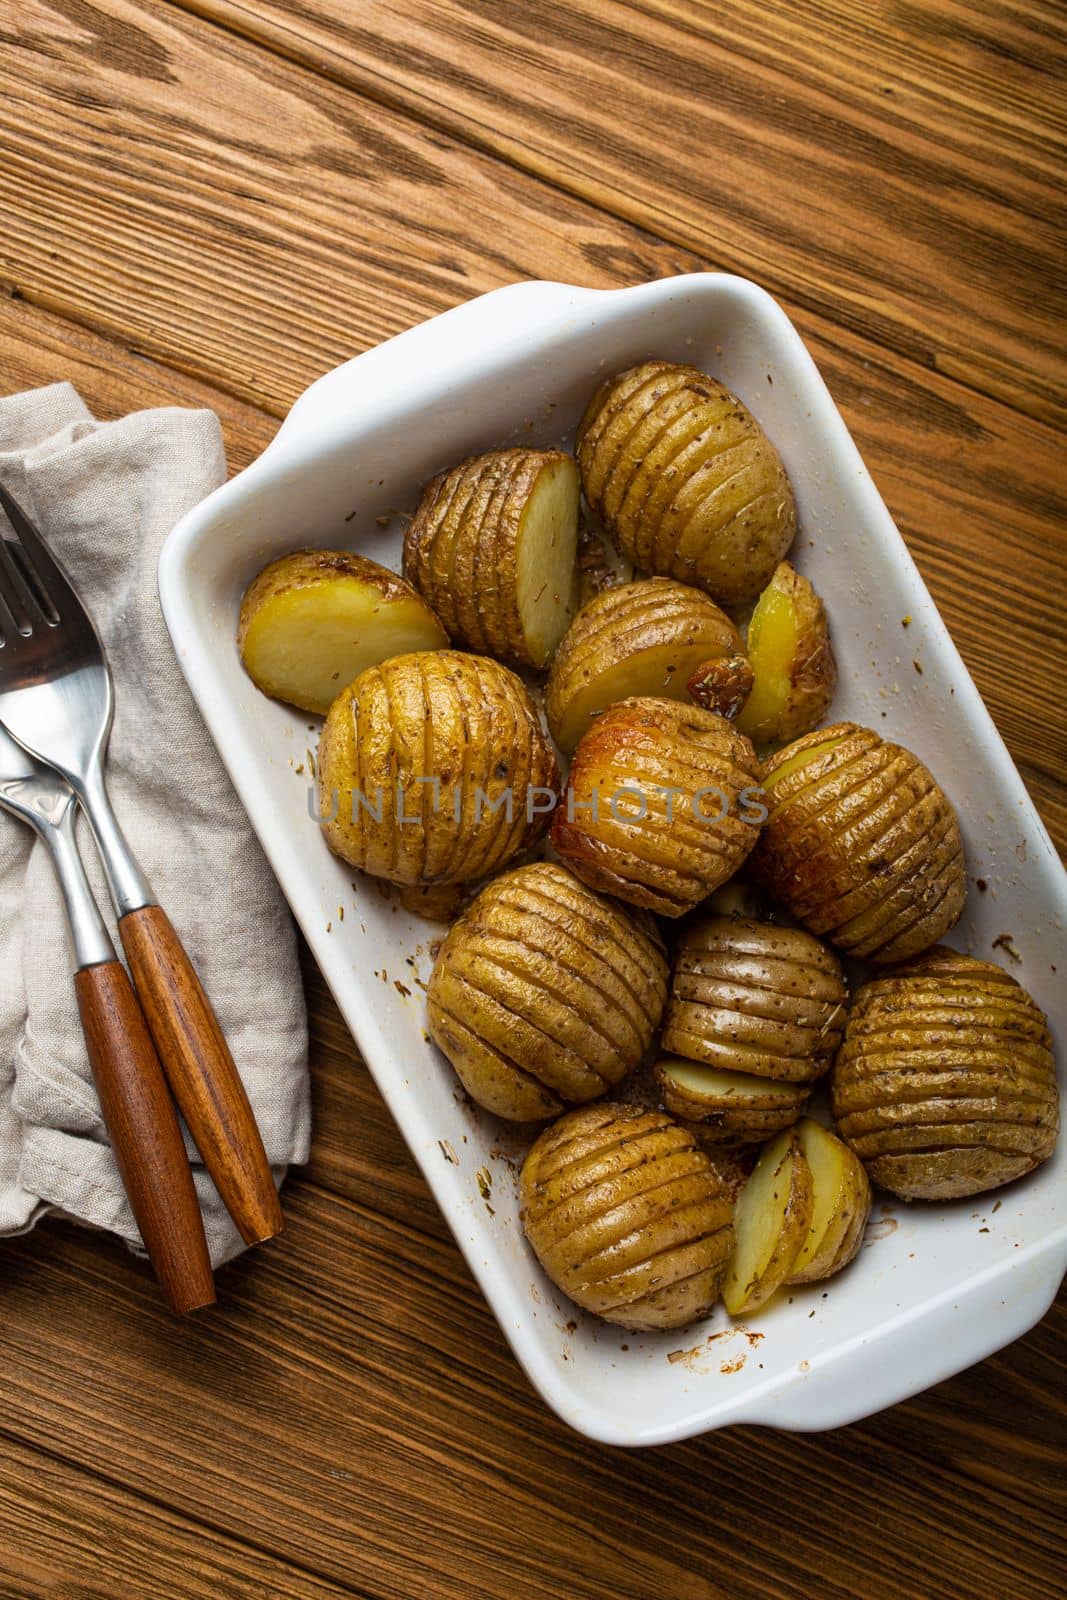 Hasselback potatoes with herbs in white ceramic casserole dish on wooden rustic table background from above. Delicious homemade accordion baked potatoes for dinner